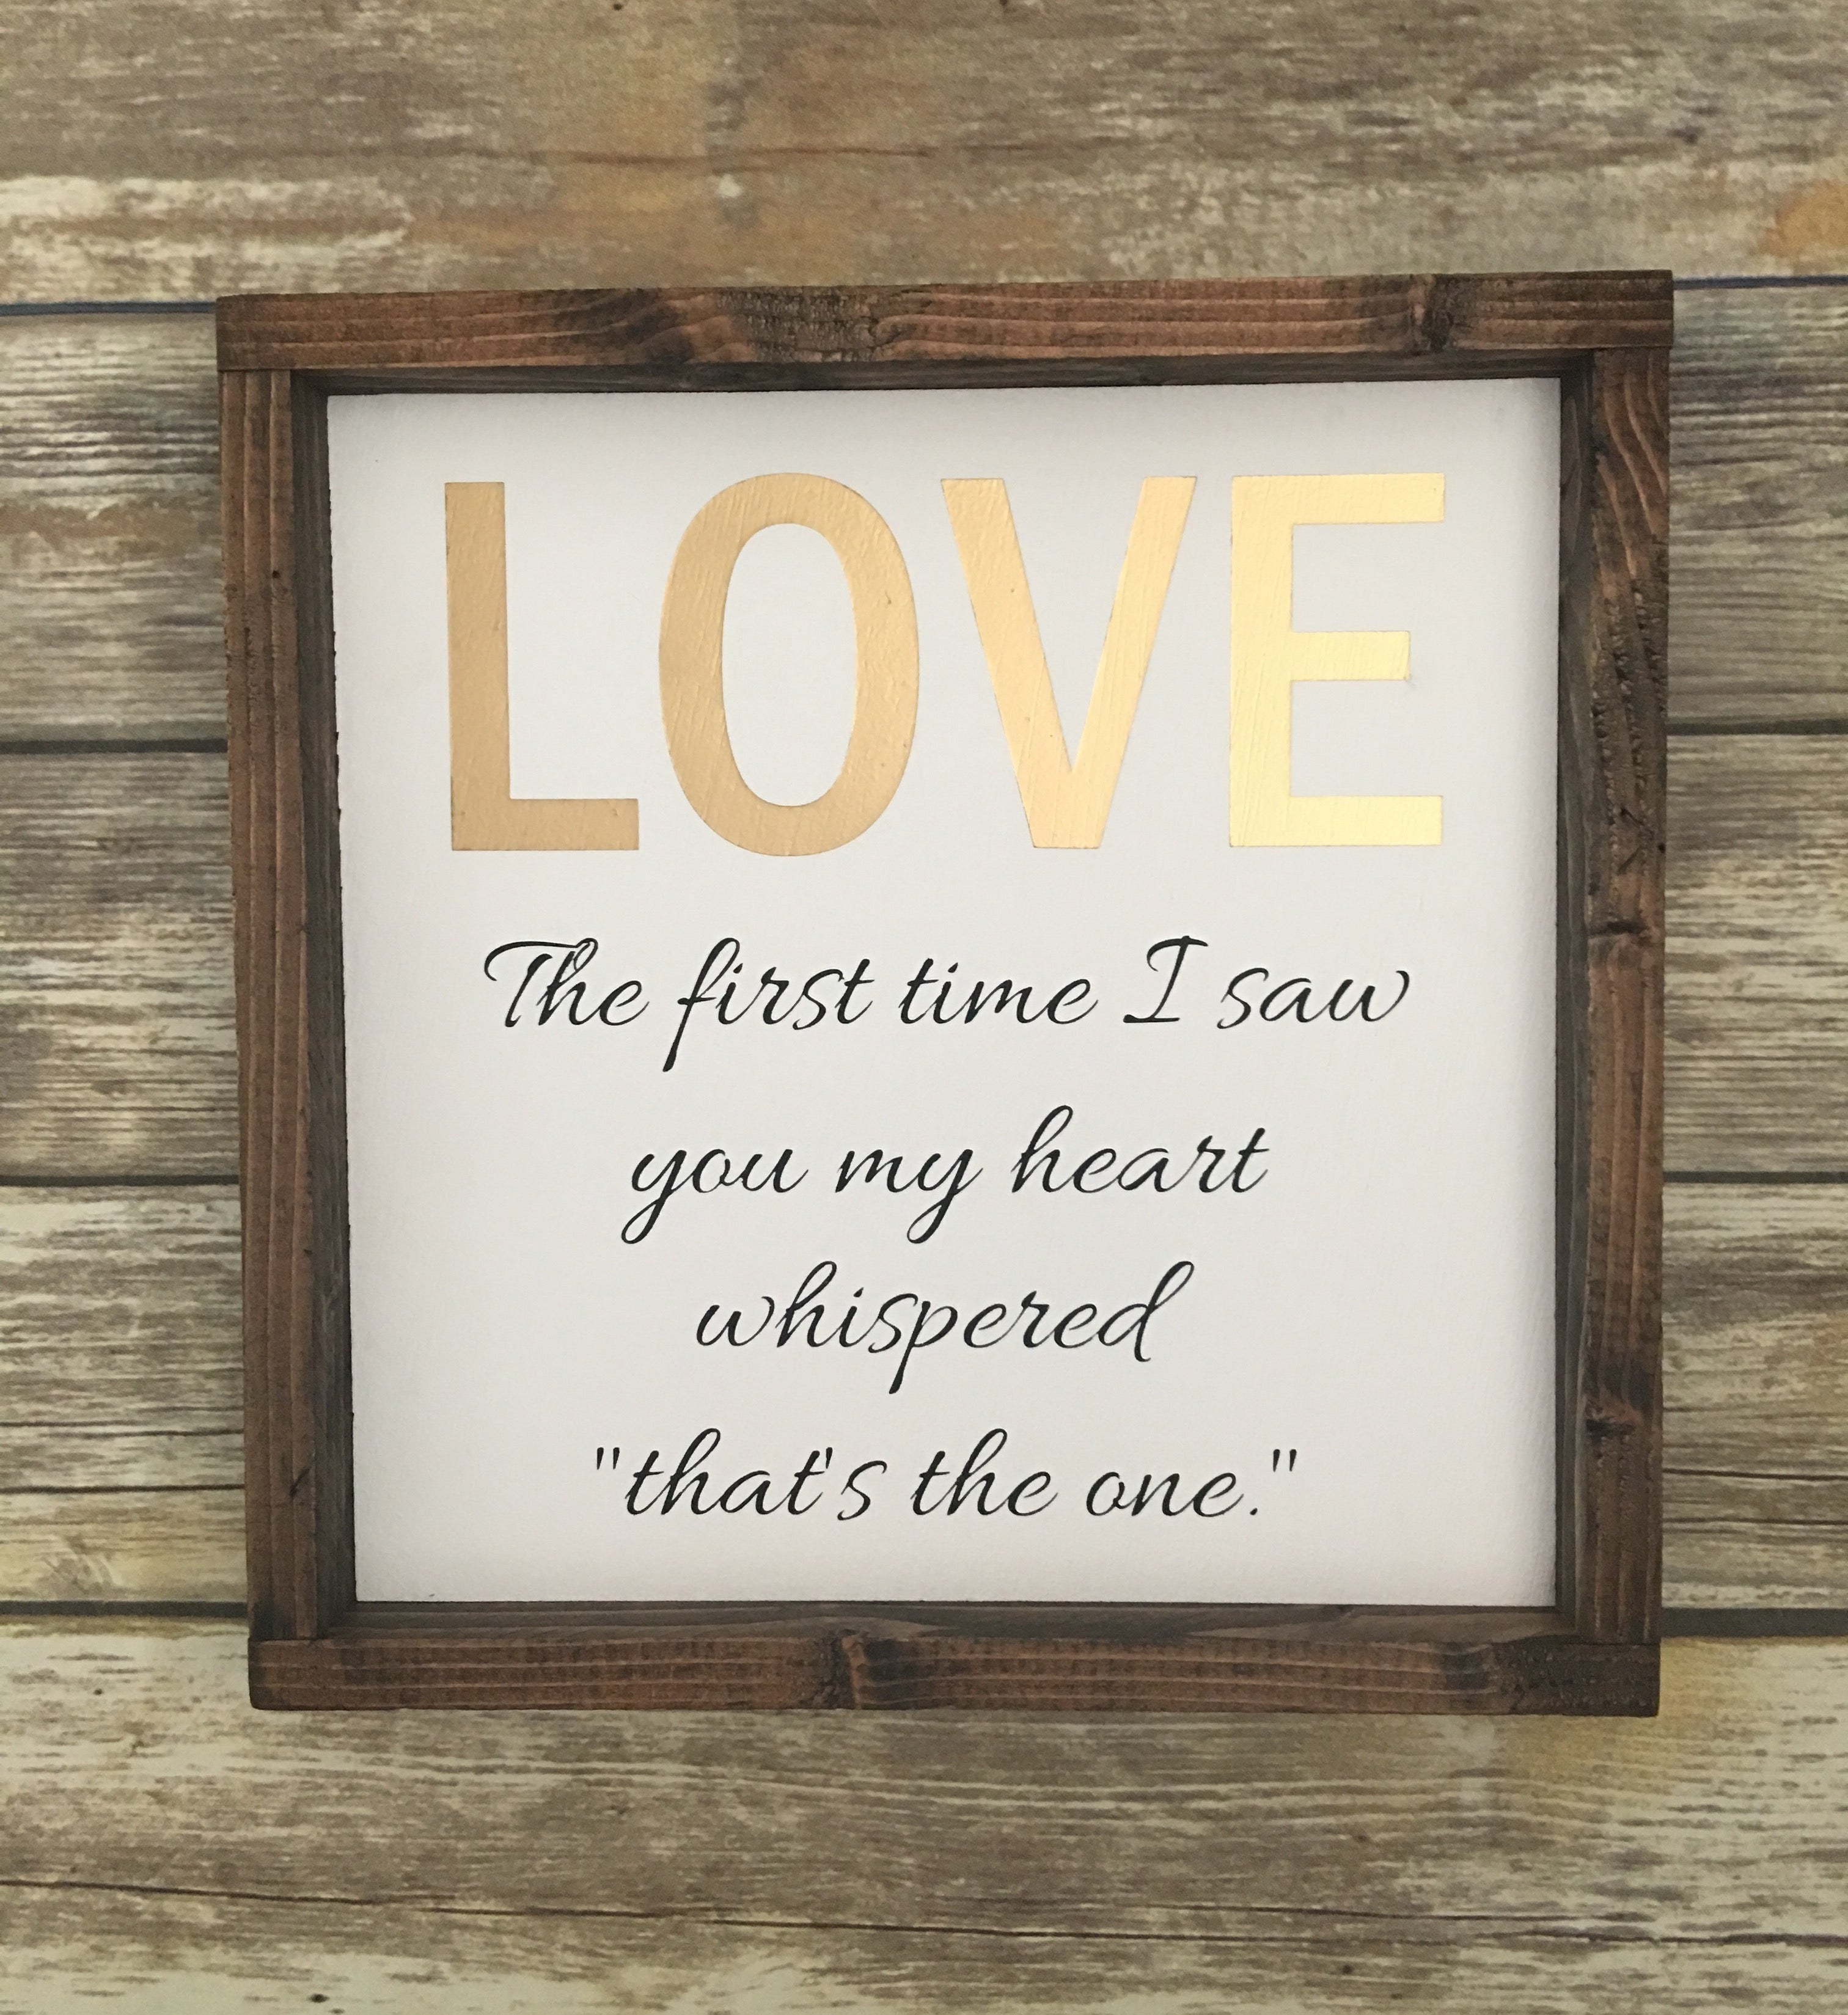 LOVE quote in gold metallic